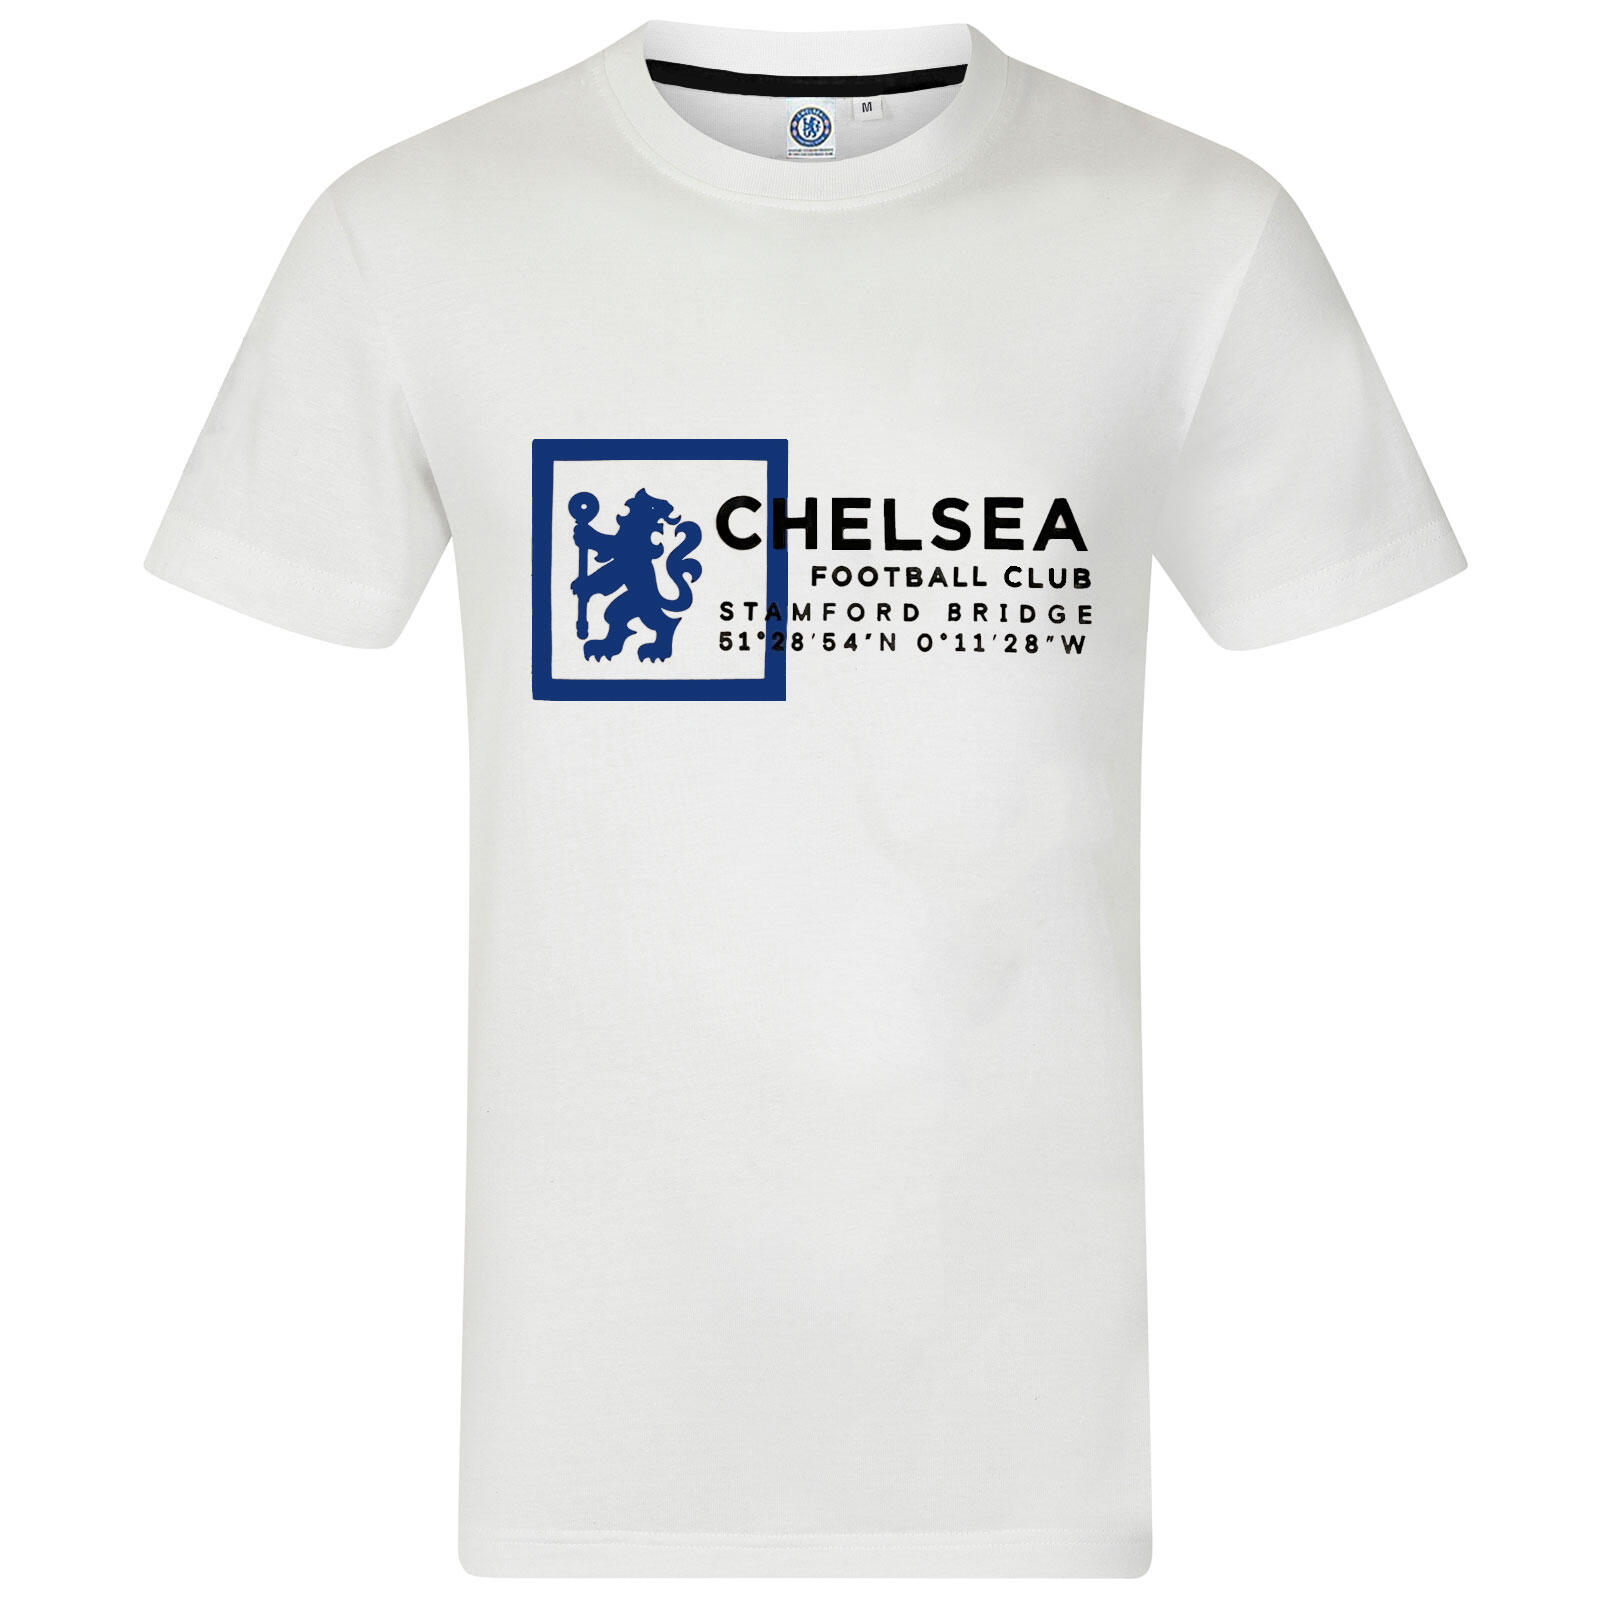 CHELSEA Chelsea FC Boys T-Shirt Graphic Kids OFFICIAL Football Gift